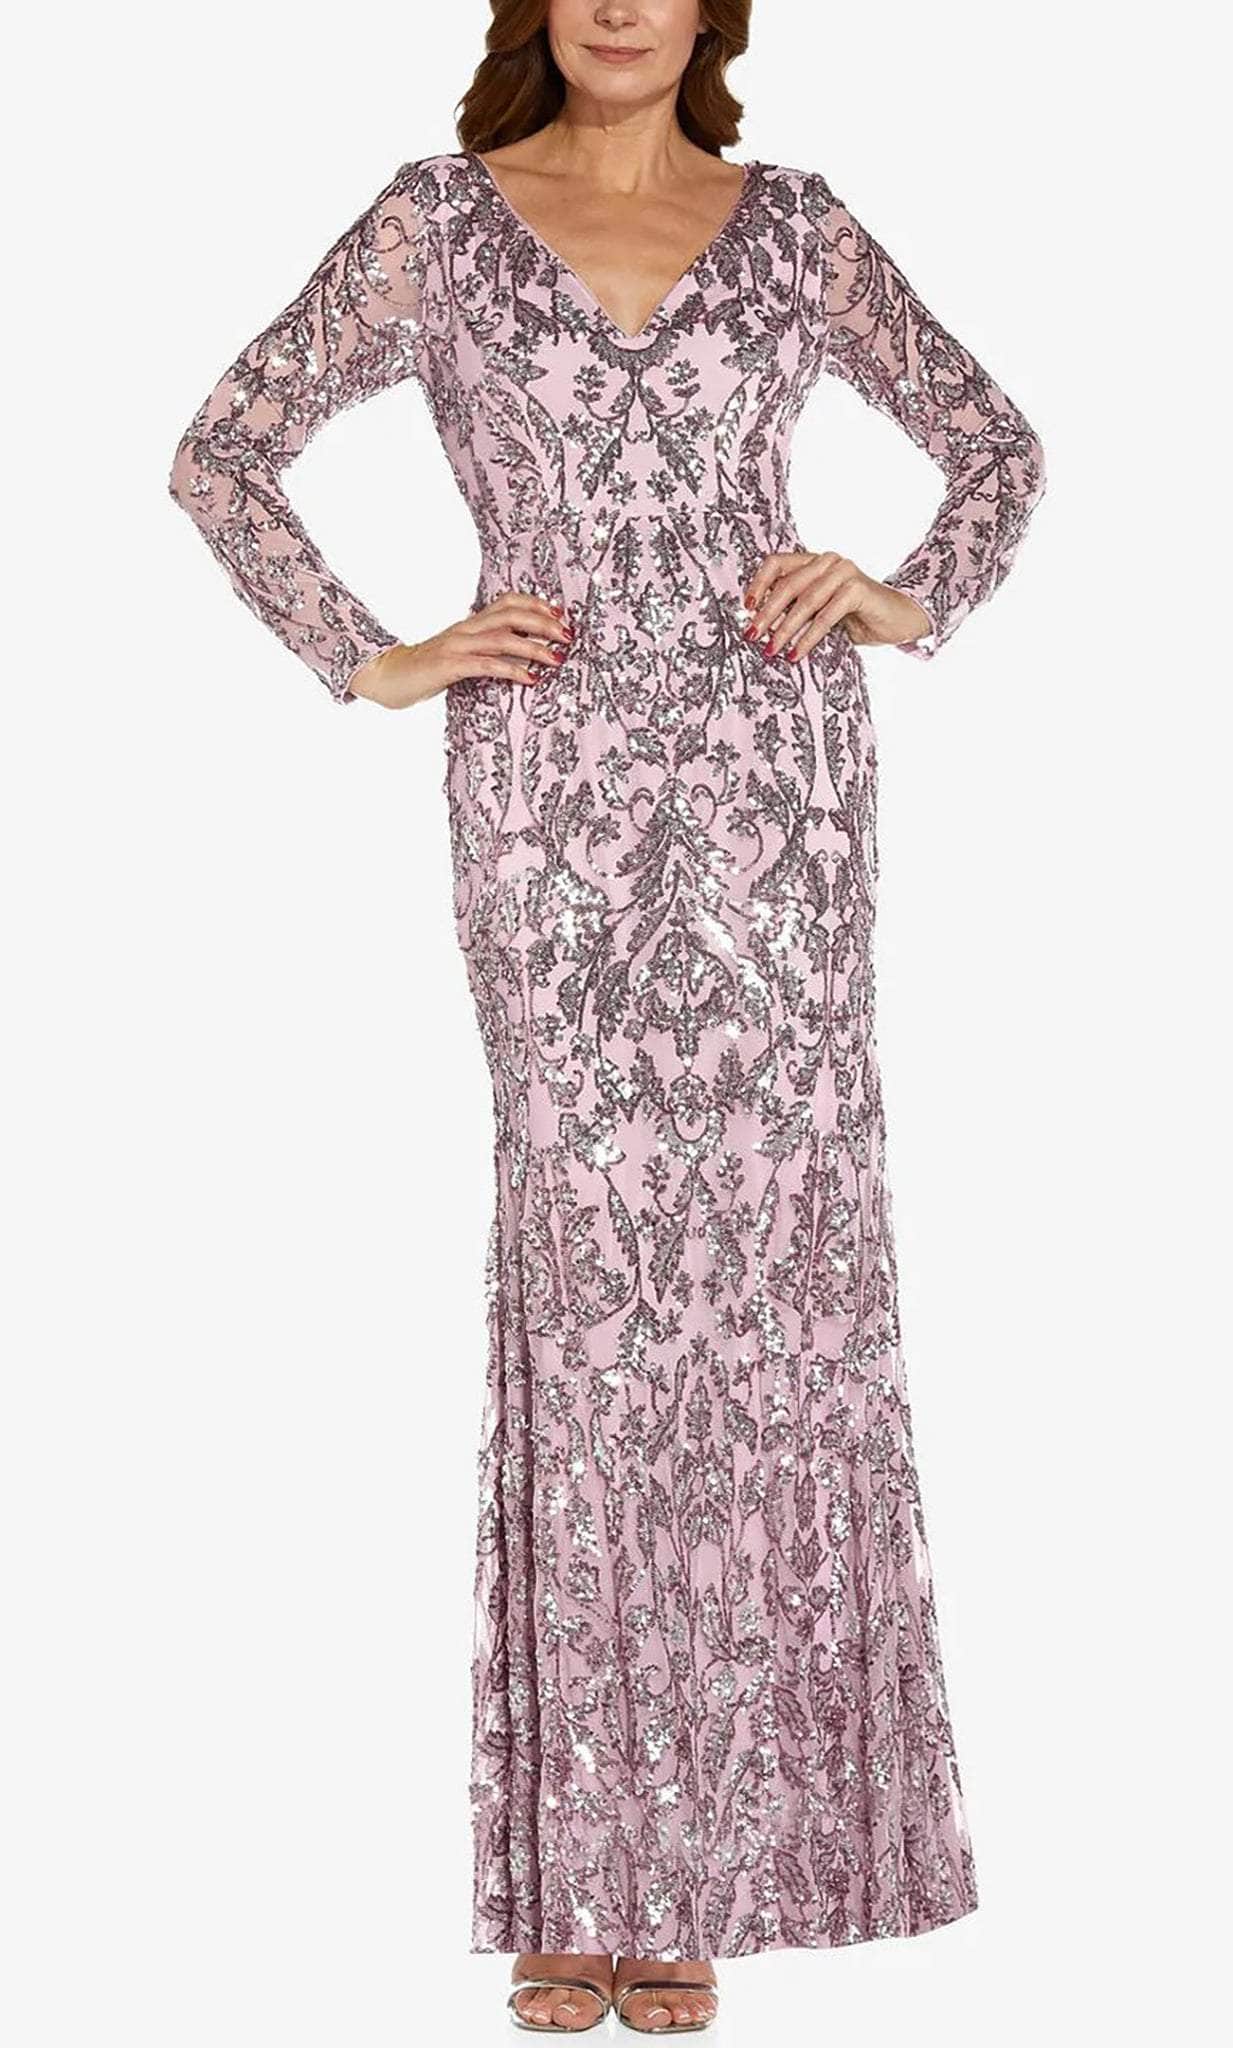 Adrianna Papell AP1E209103 - V Neck Sequined Evening Gown Mother of the Bride Dresses 2 / Smoky Rose